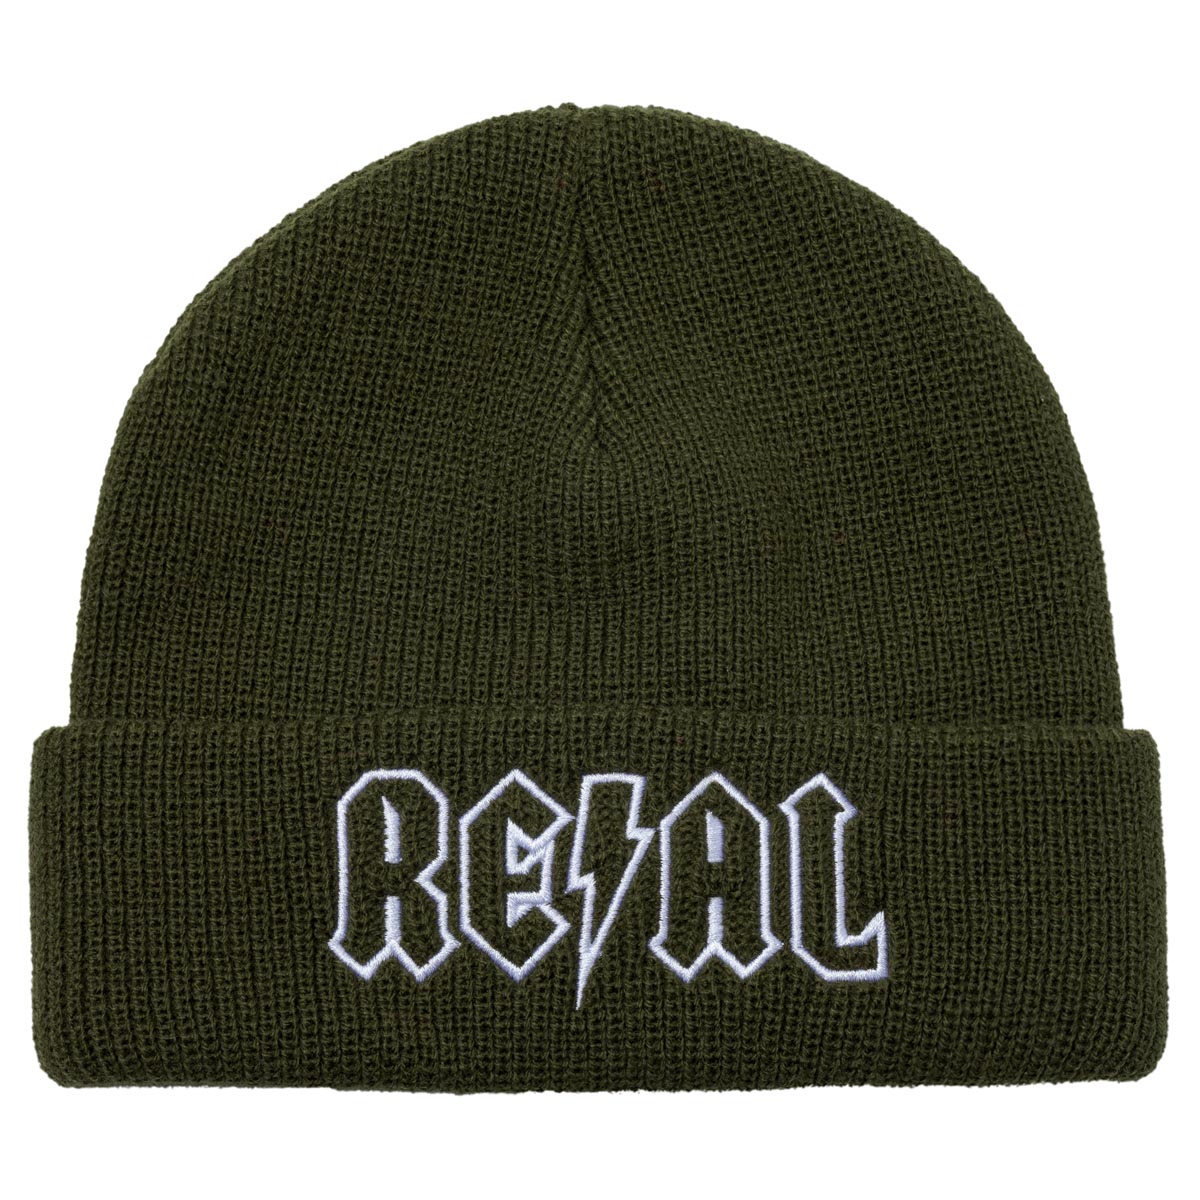 Real Deeds Emb Beanie - Olive/White image 1